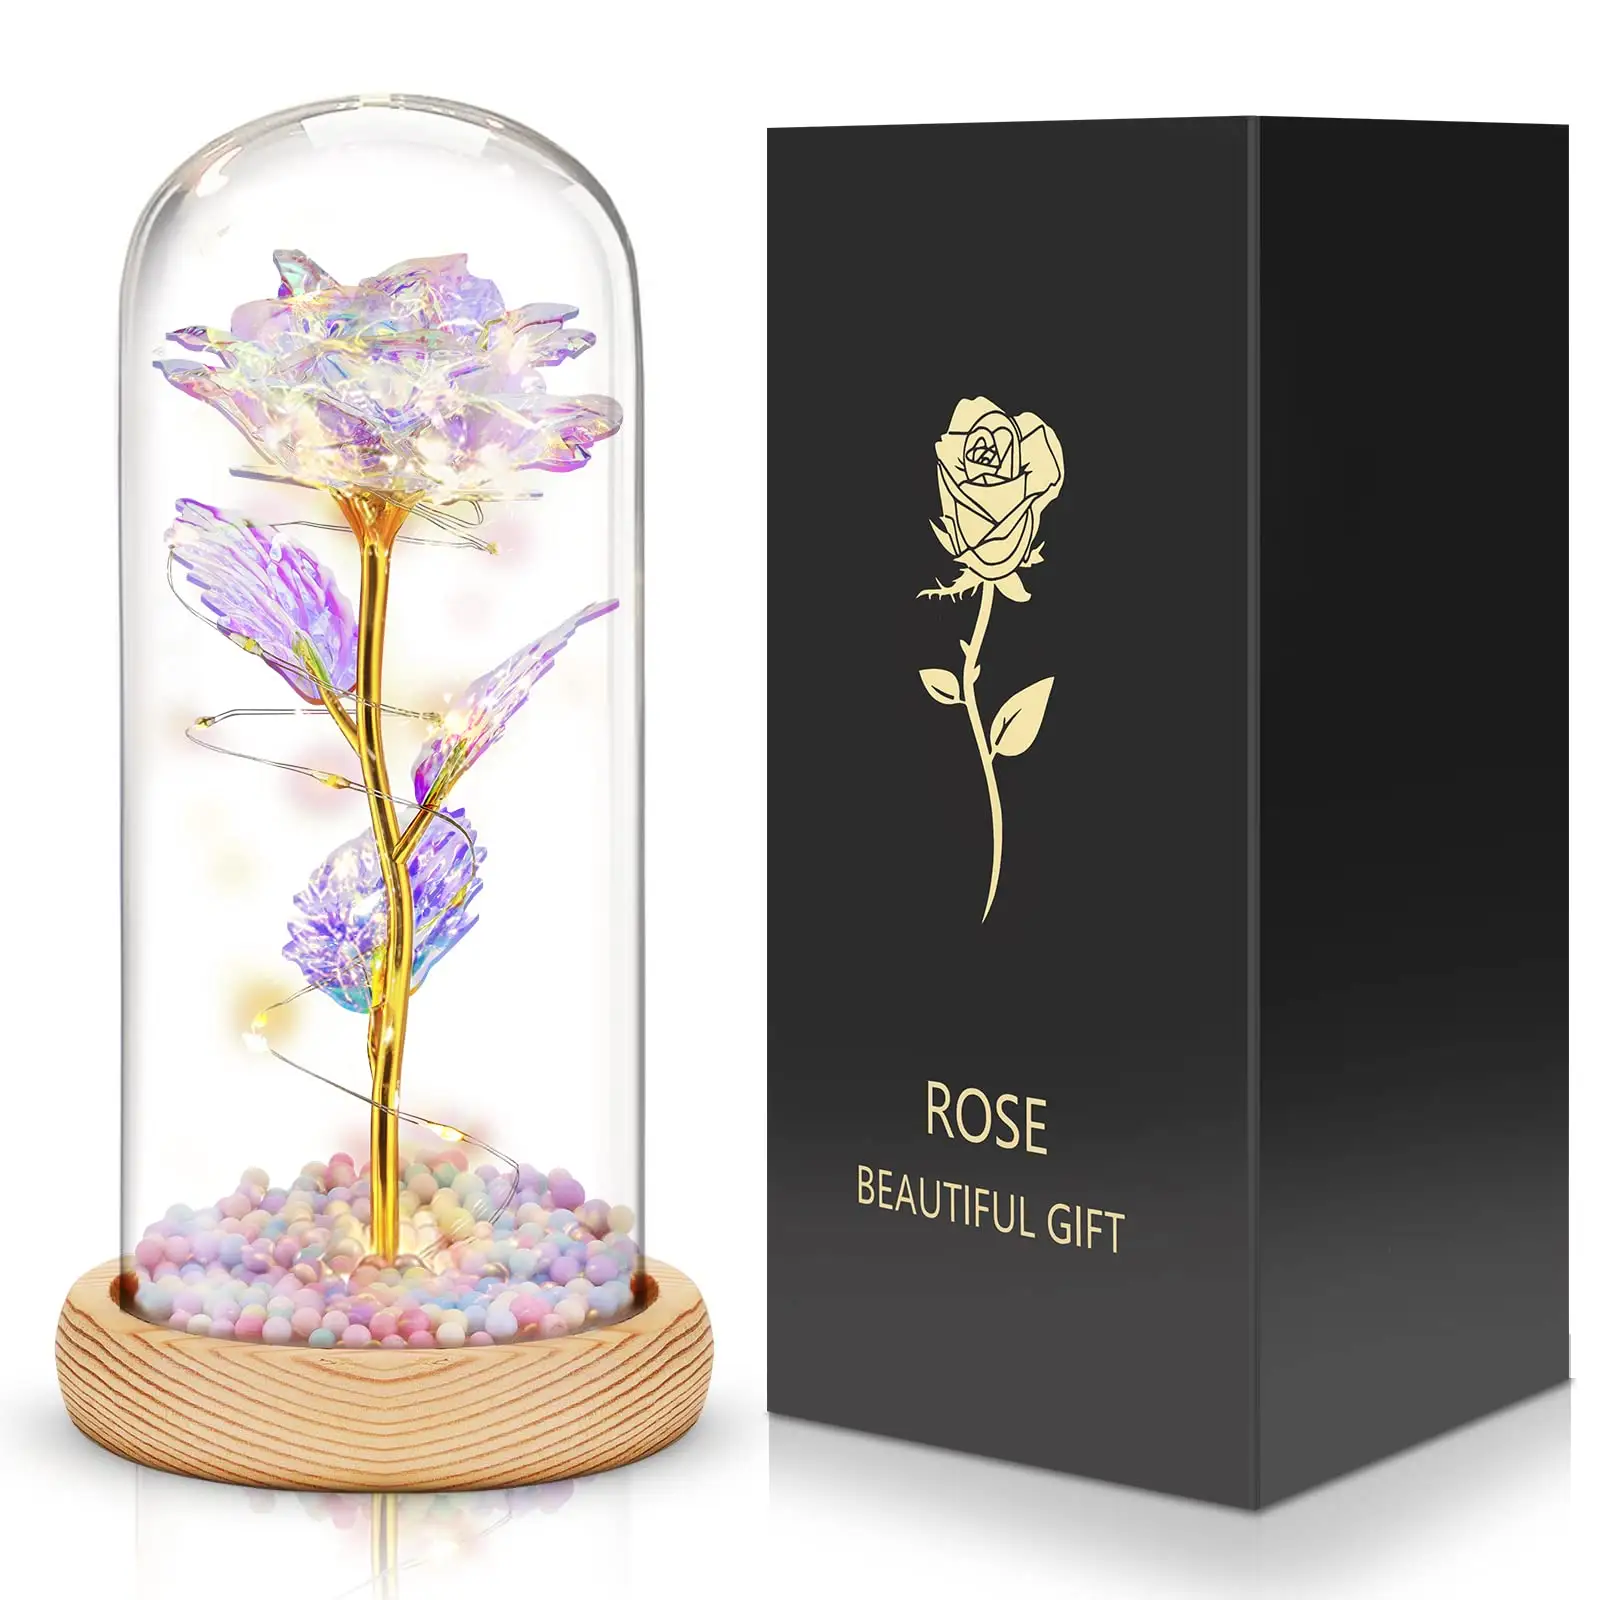 UO Artificial Rose Bulk Valentine Gifts Rose Led Lamp 24k Gold Foil Single Galaxy Preserved Gift Rose with Stem in Glass Dome